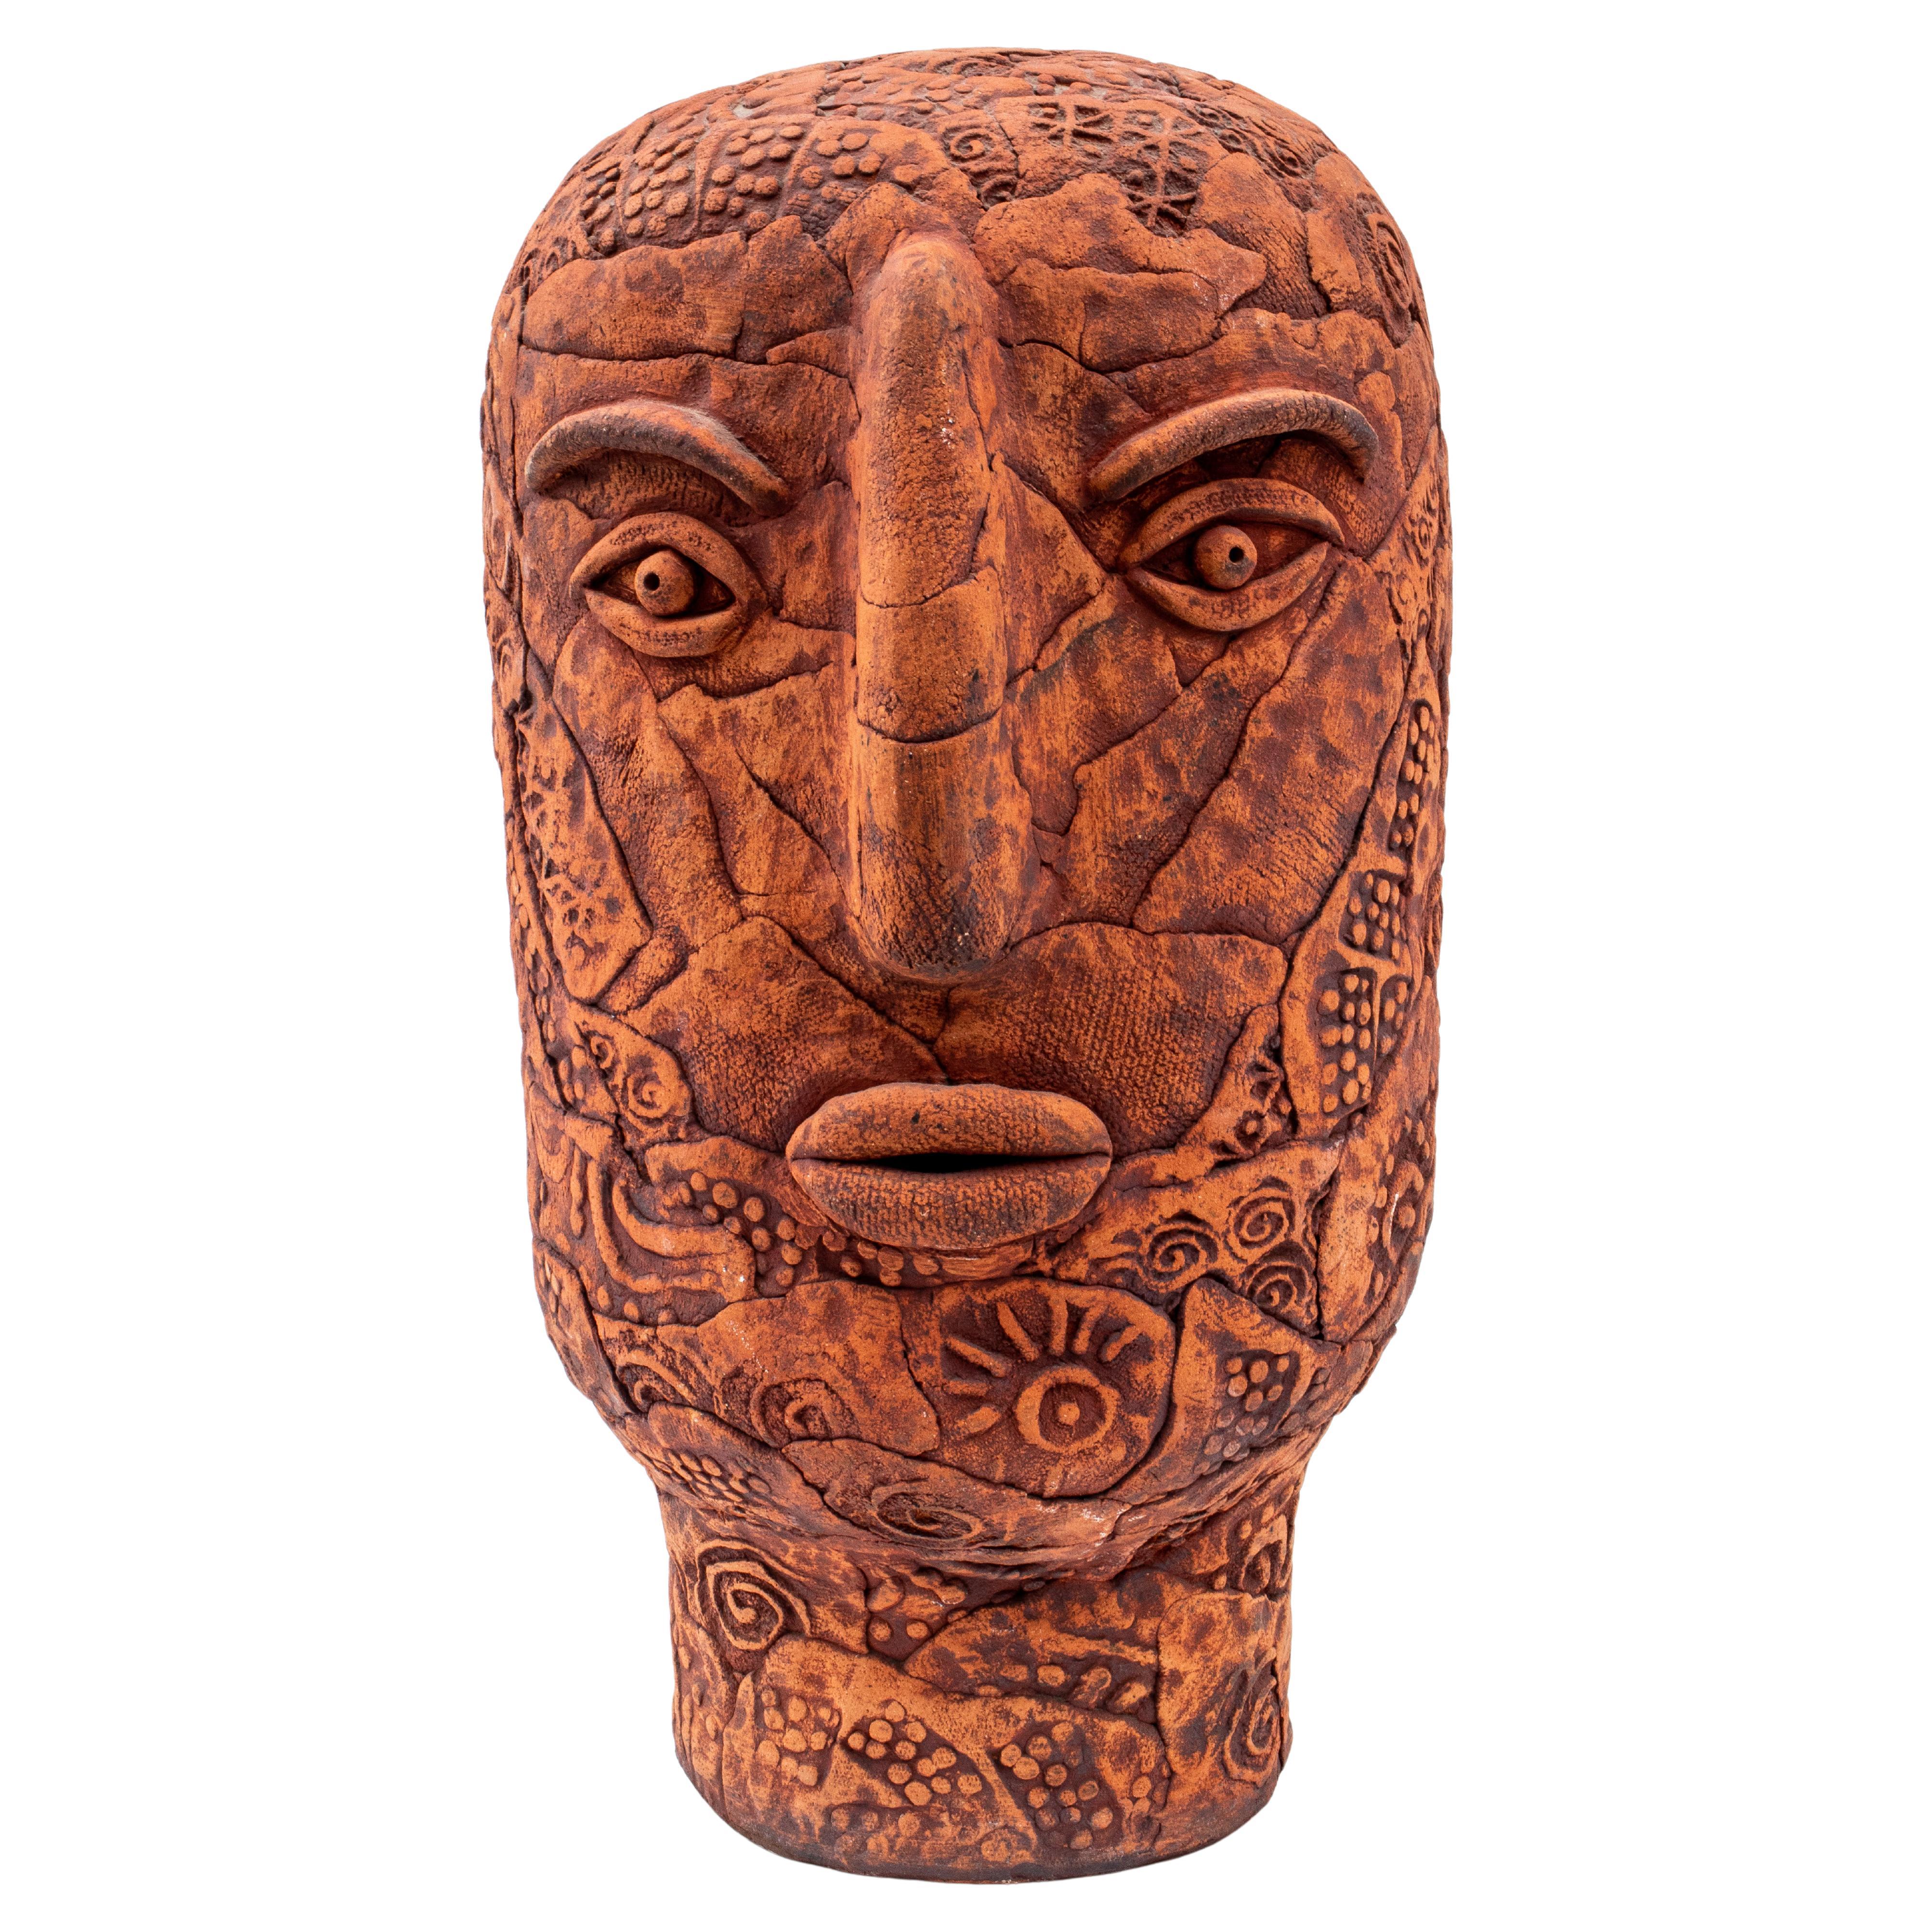 Louis Mendez Abstracted Head Ceramic Sculpture at 1stDibs